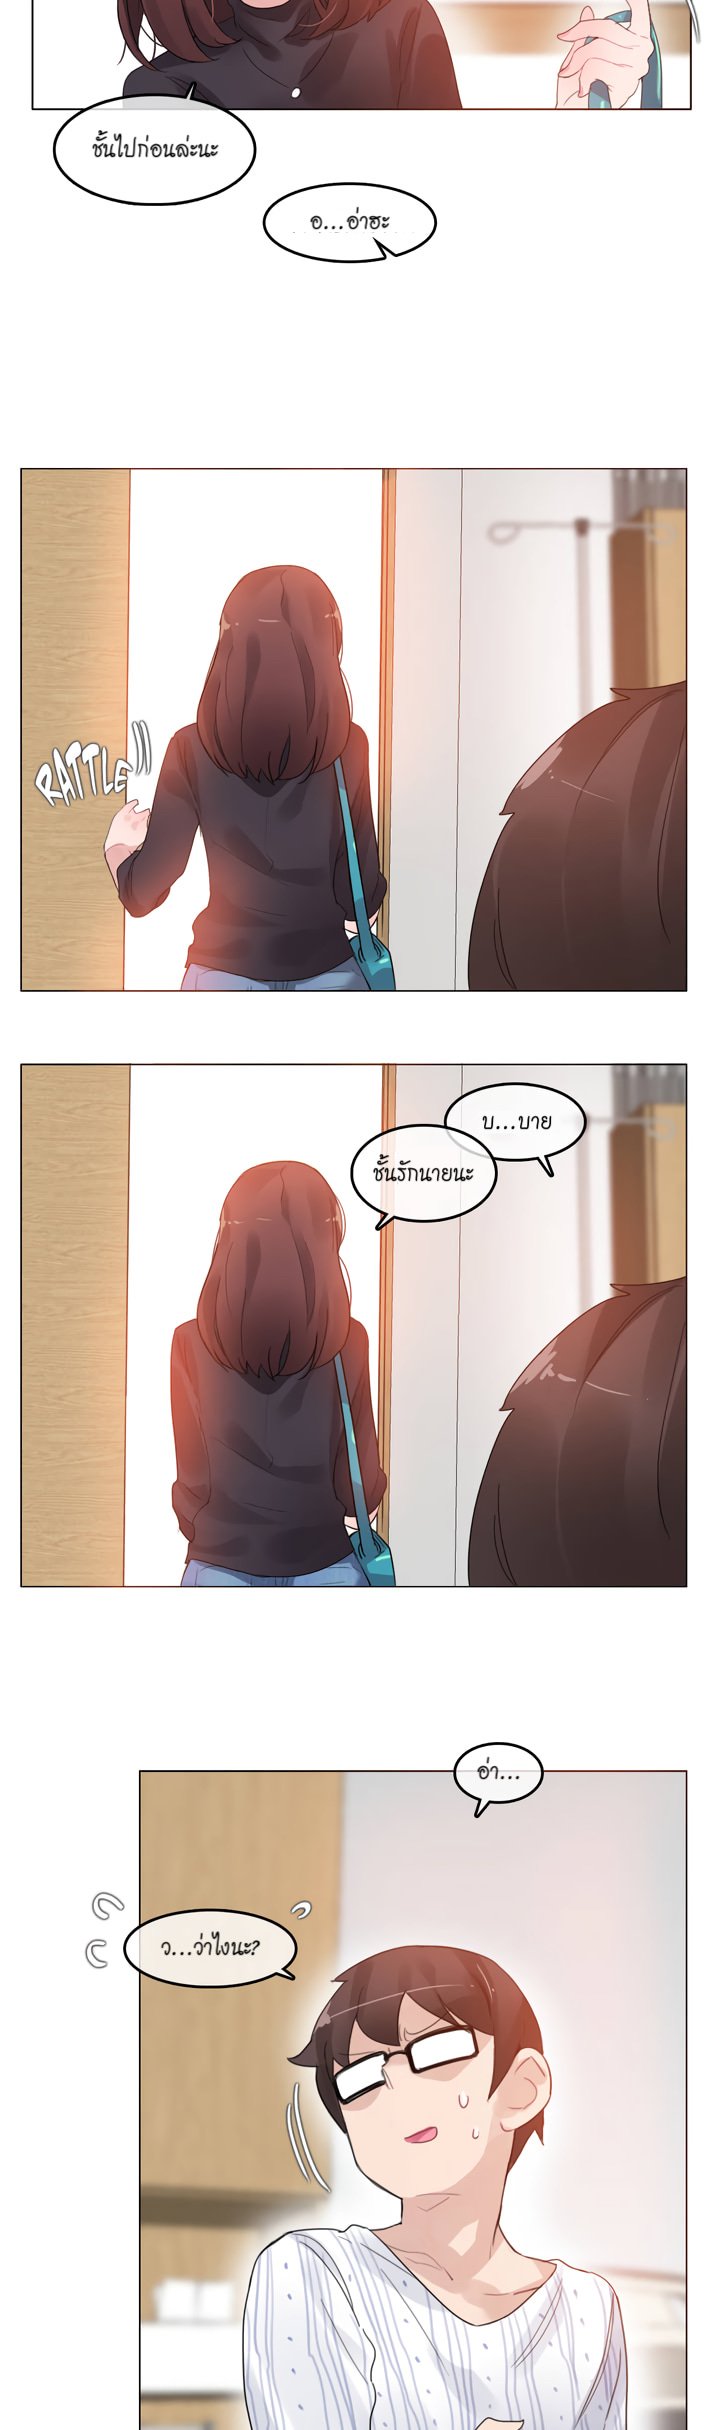 A Pervert’s Daily Life 51 20